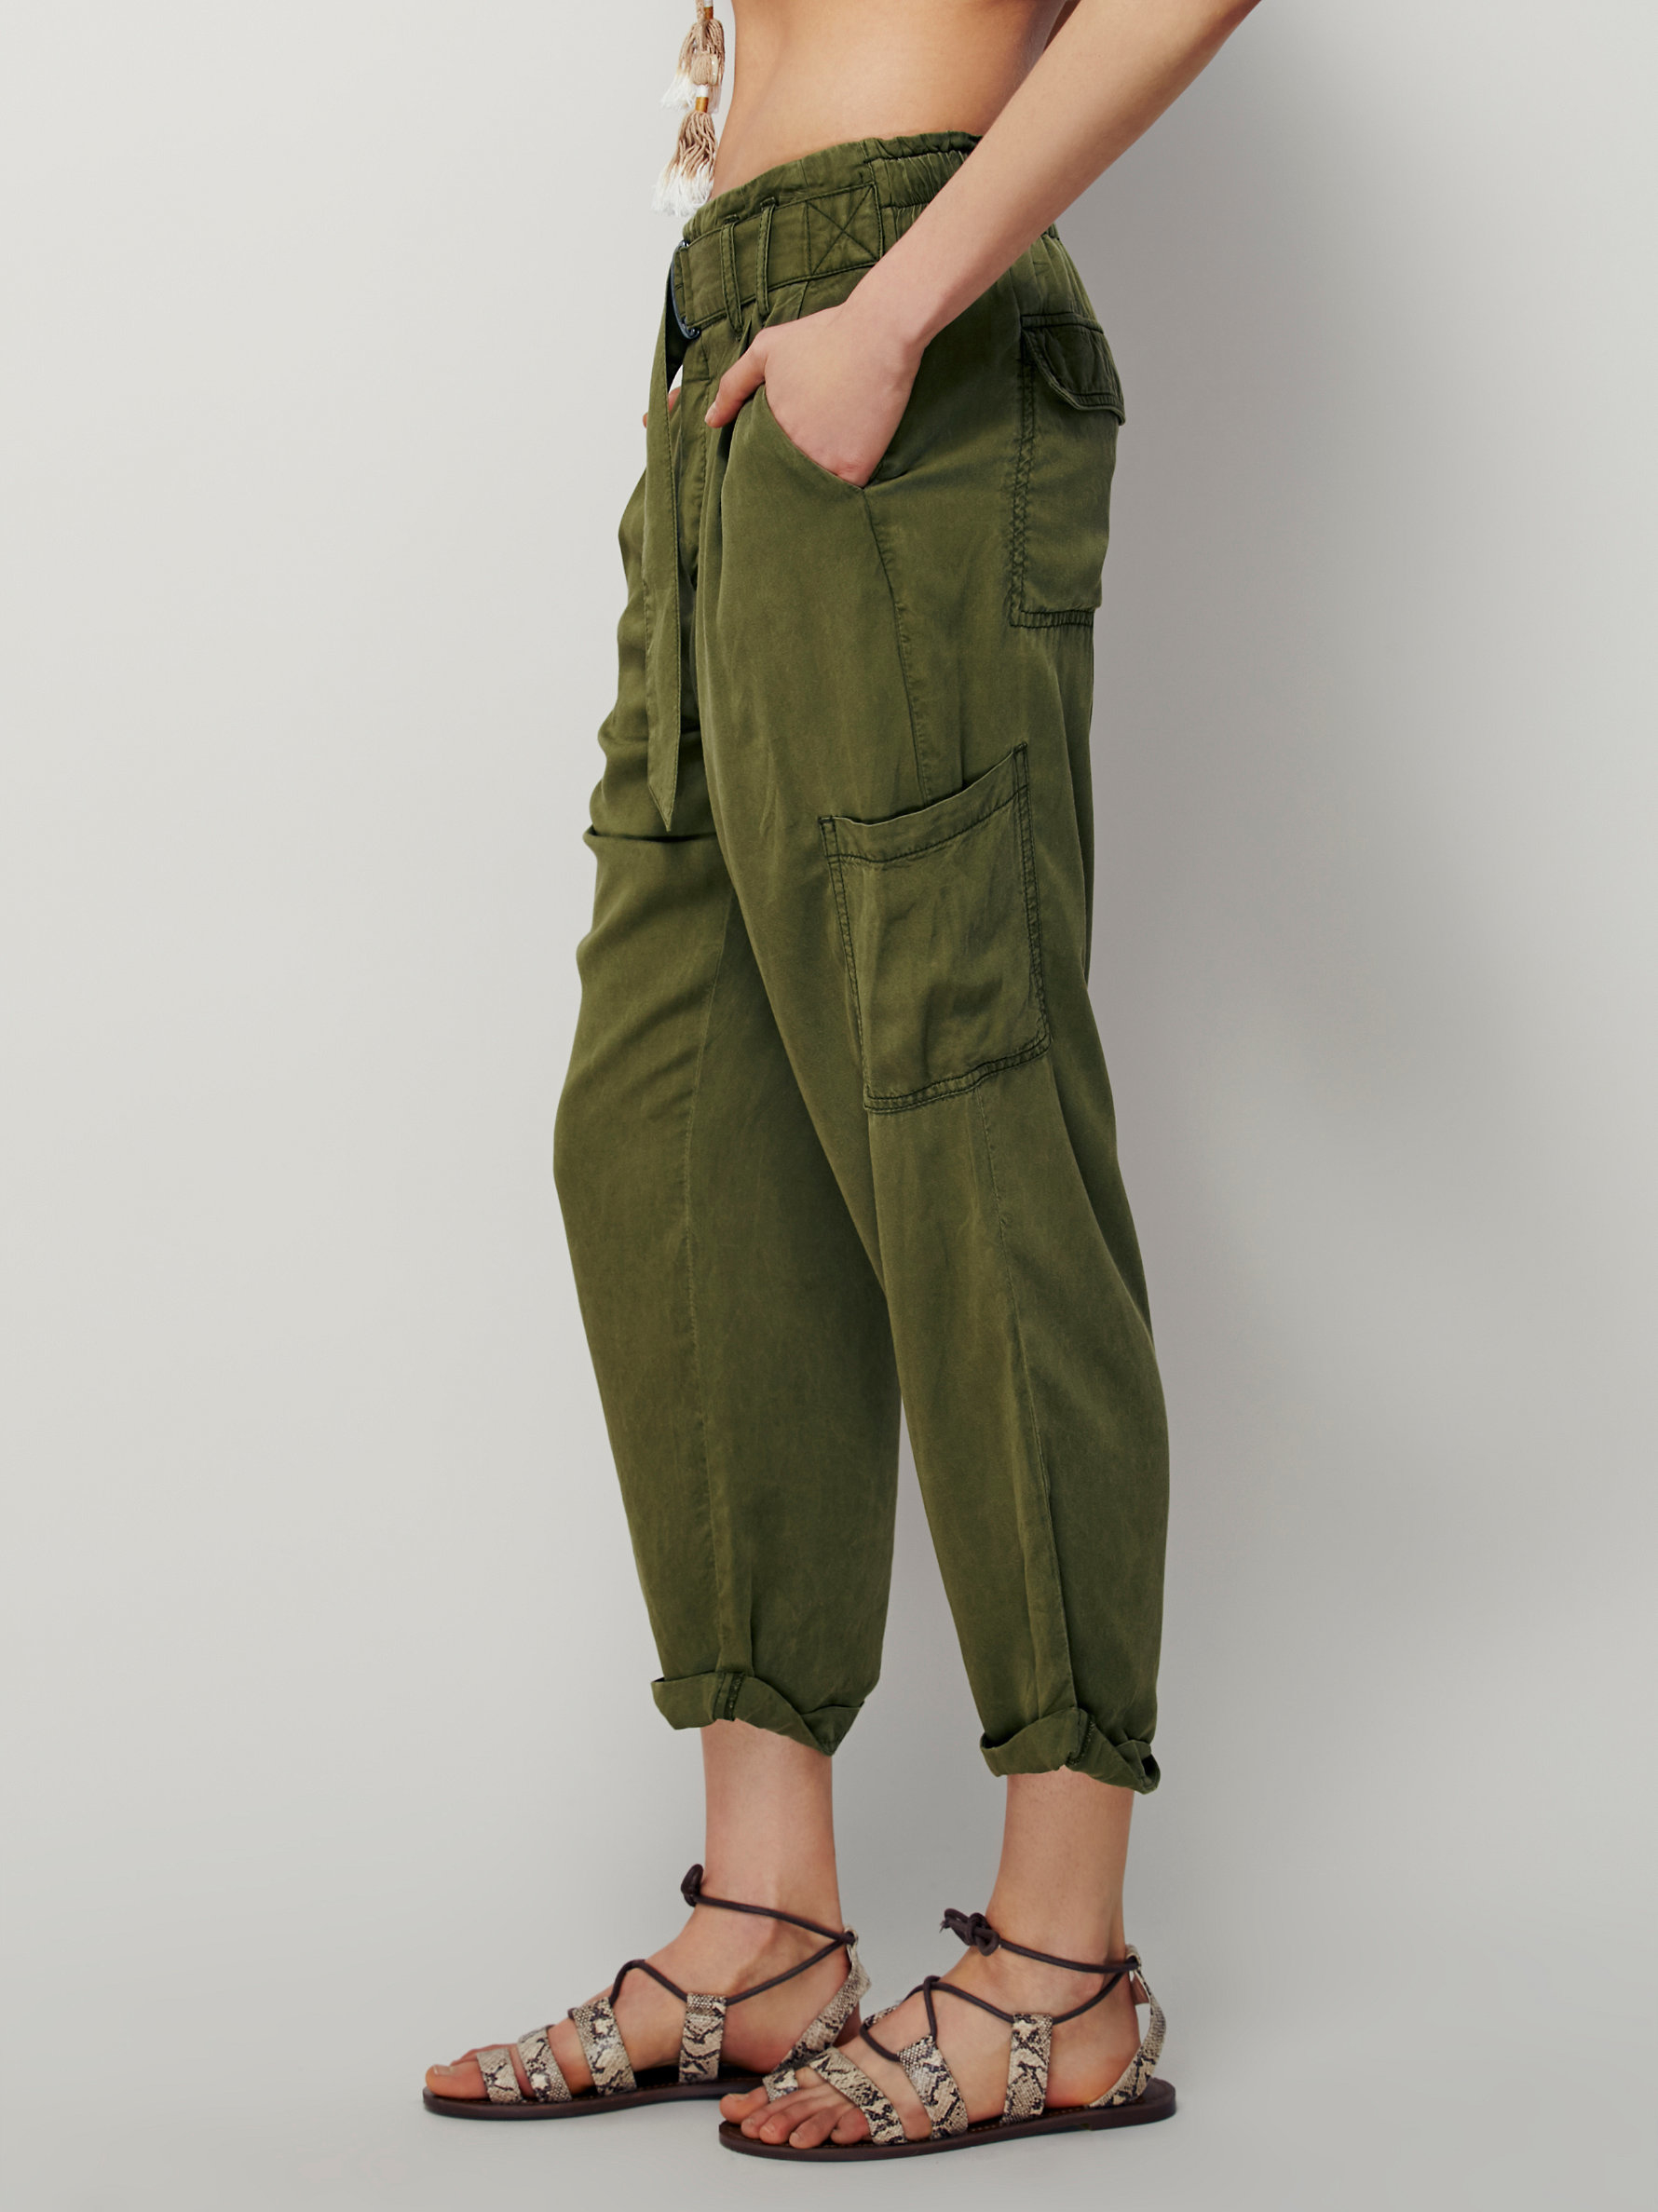 Lyst - Free People Summer's Over Cargo Pants in Green